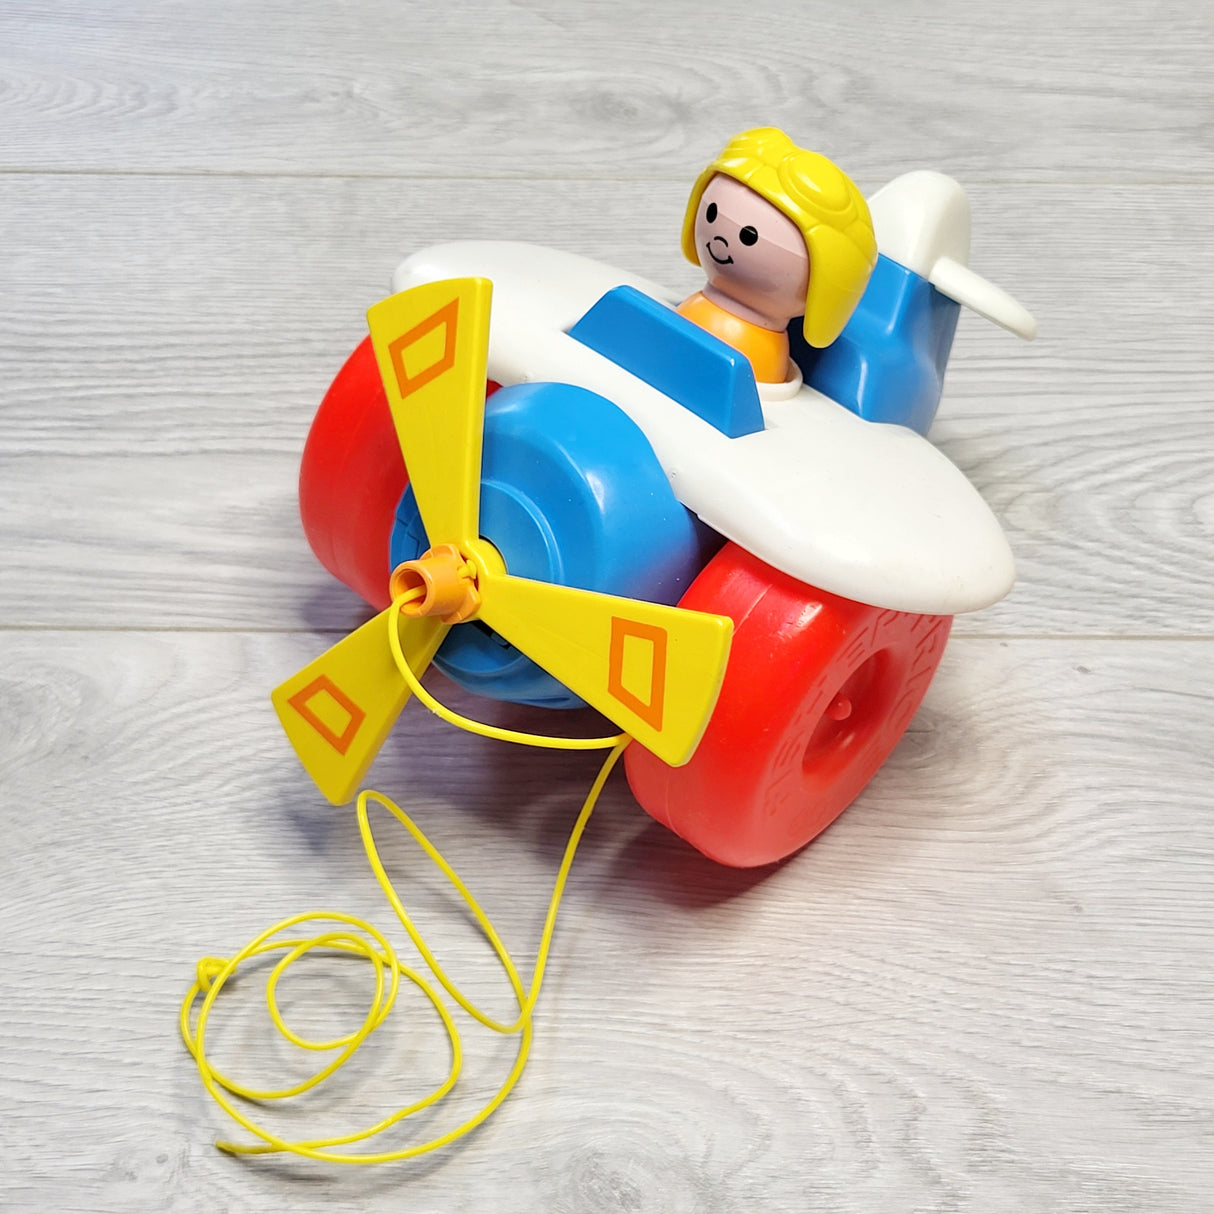 JGAL1 - Vintage 1980 Fisher Price Airplane pull toy (propeller turns)